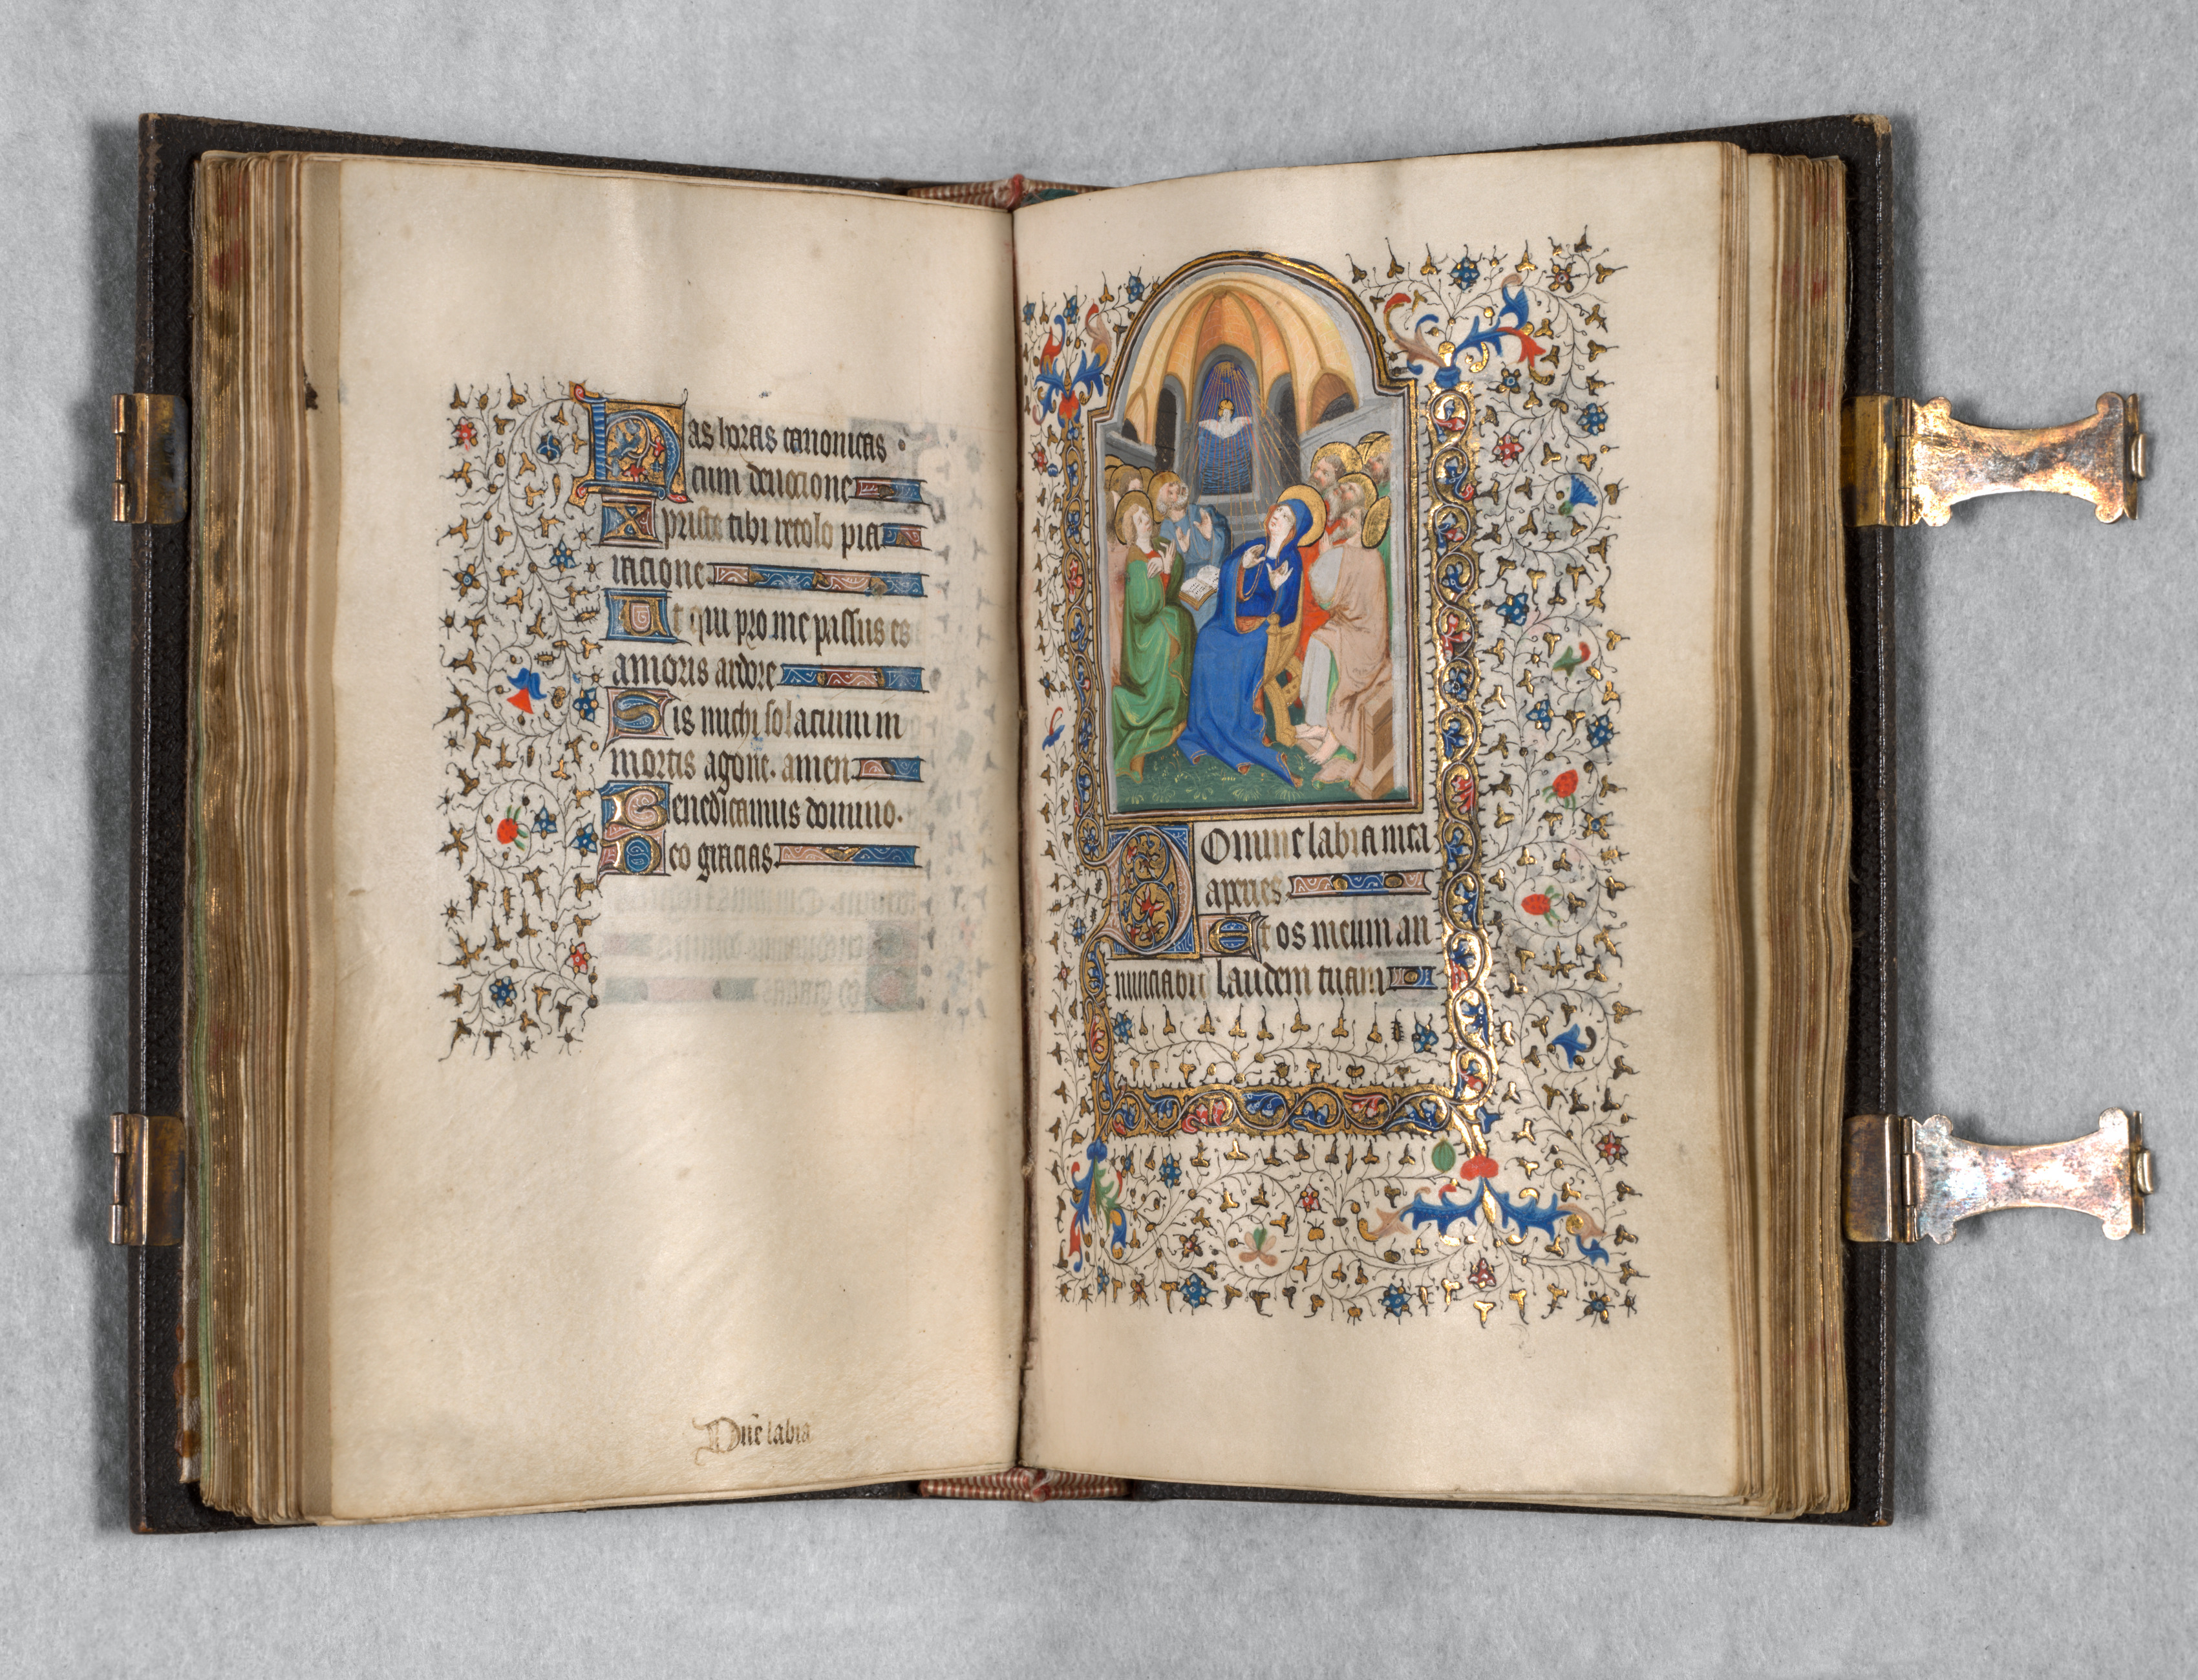 Book of Hours (Use of Paris): Fol. 108r, The Pentecost